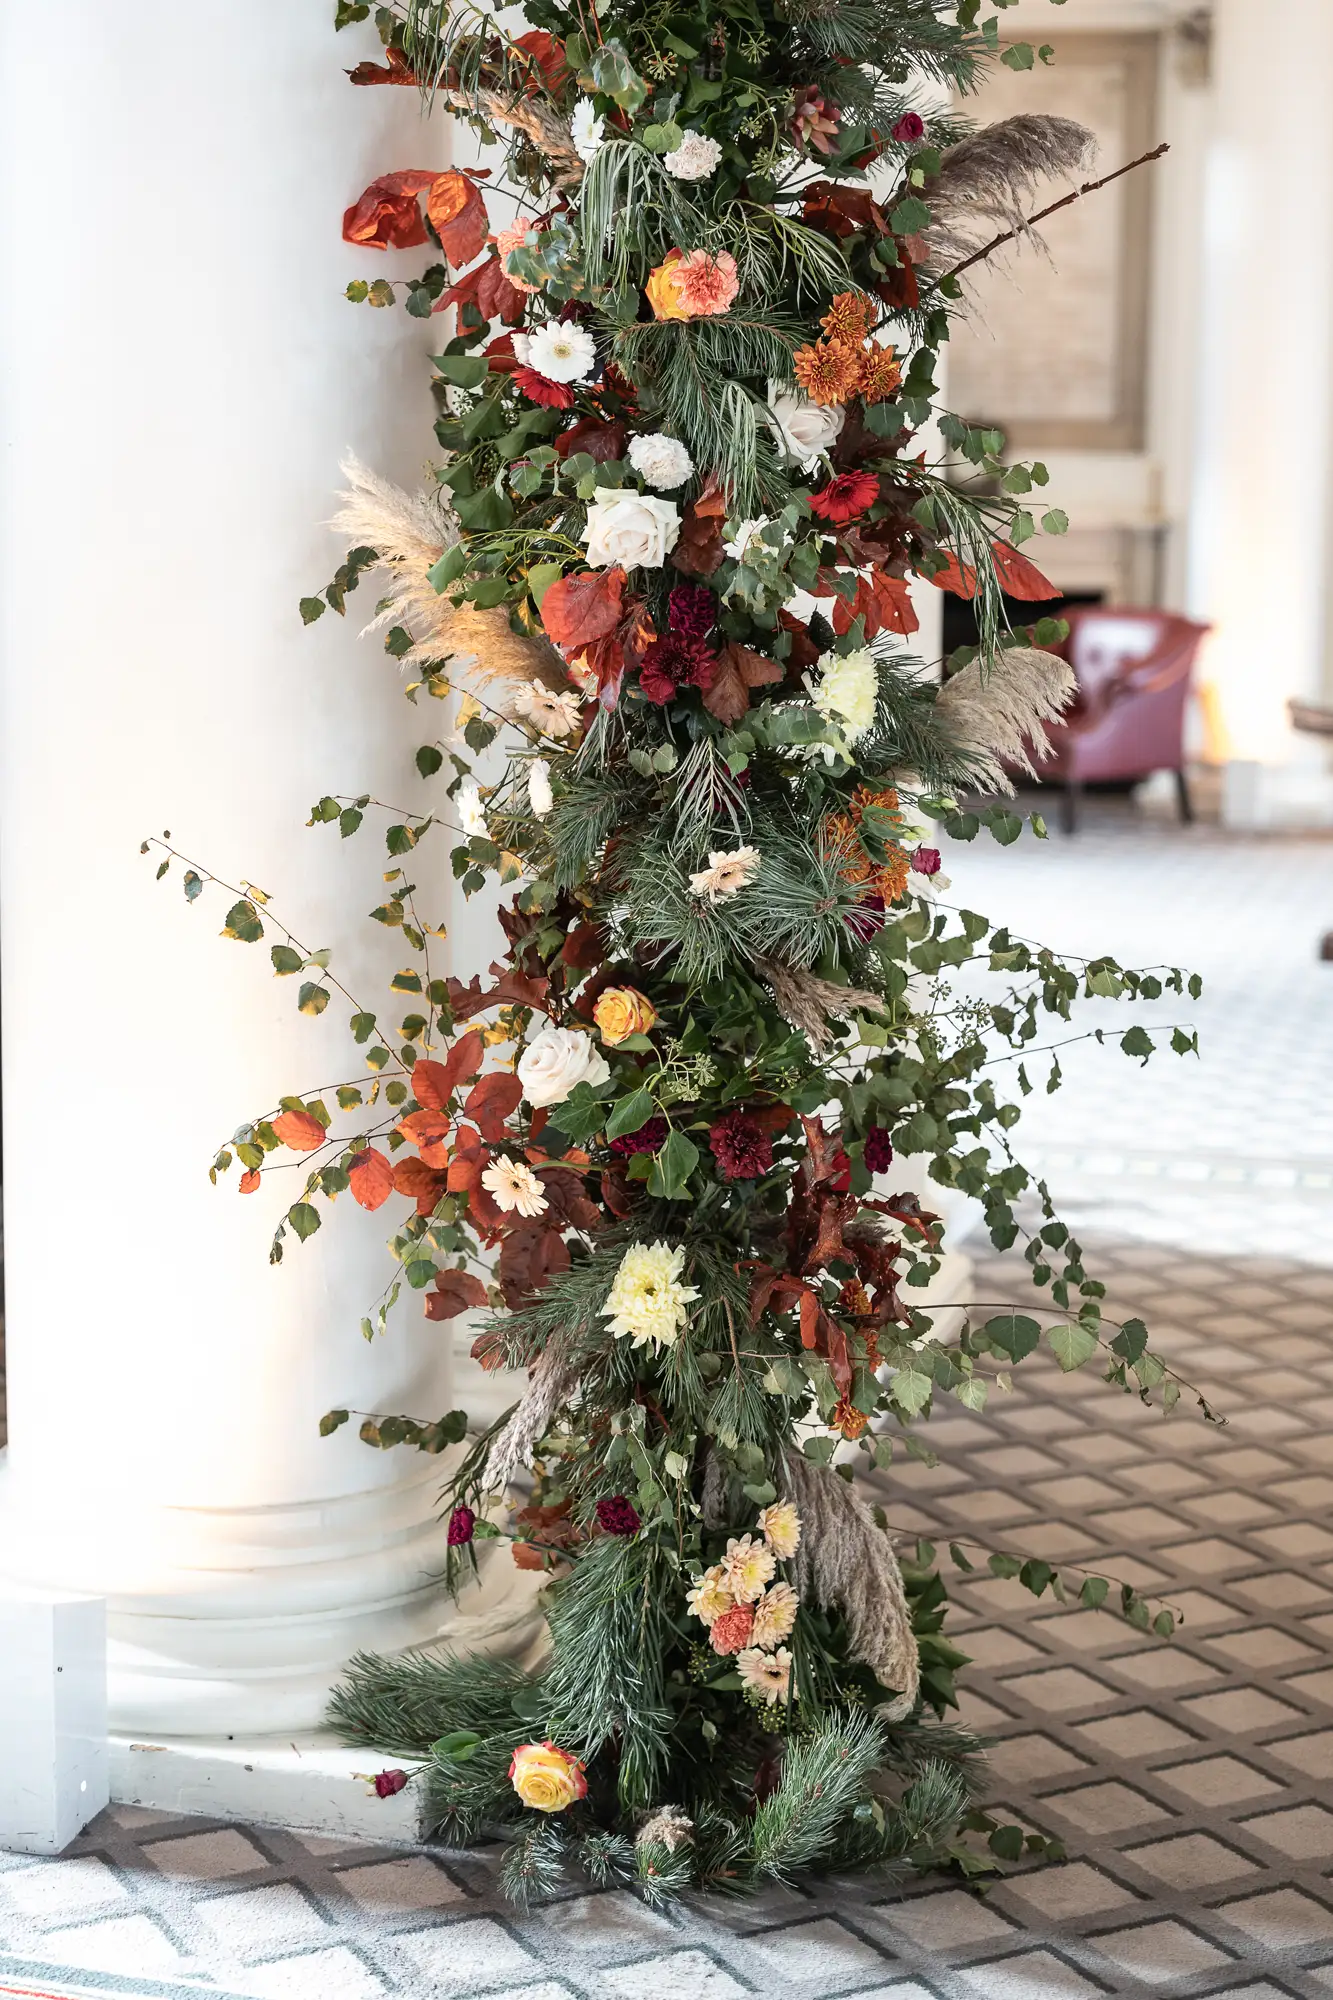 A slim, vertical christmas tree decorated with a mix of red, white, and yellow flowers, along with green leaves and feathers, set against a white pillar.